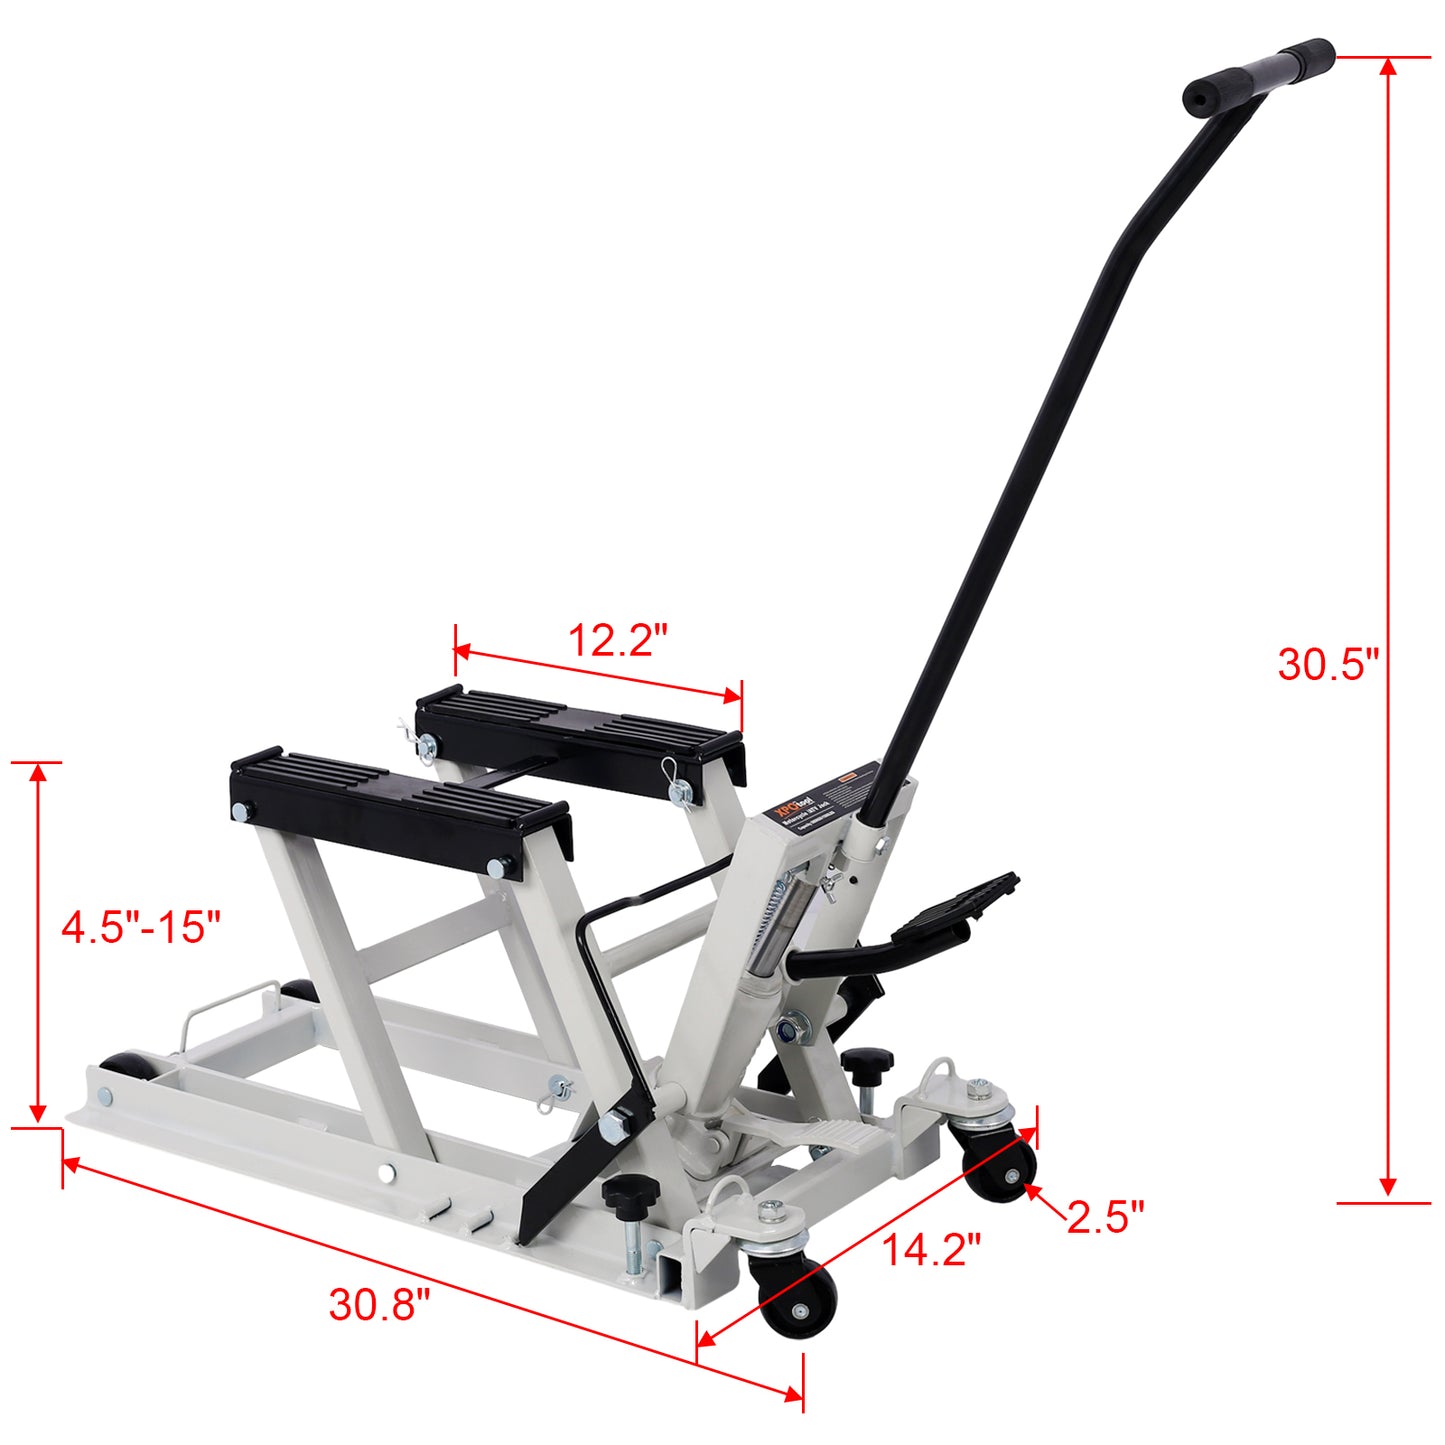 Hydraulic Motorcycle Lift Jack, 1500 LBS Capacity ATV Scissor Lift Jack, Portable Motorcycle Lift Table with 4 Wheels, Hydraulic Foot-Operated Hoist Stand with 2xtie down gray